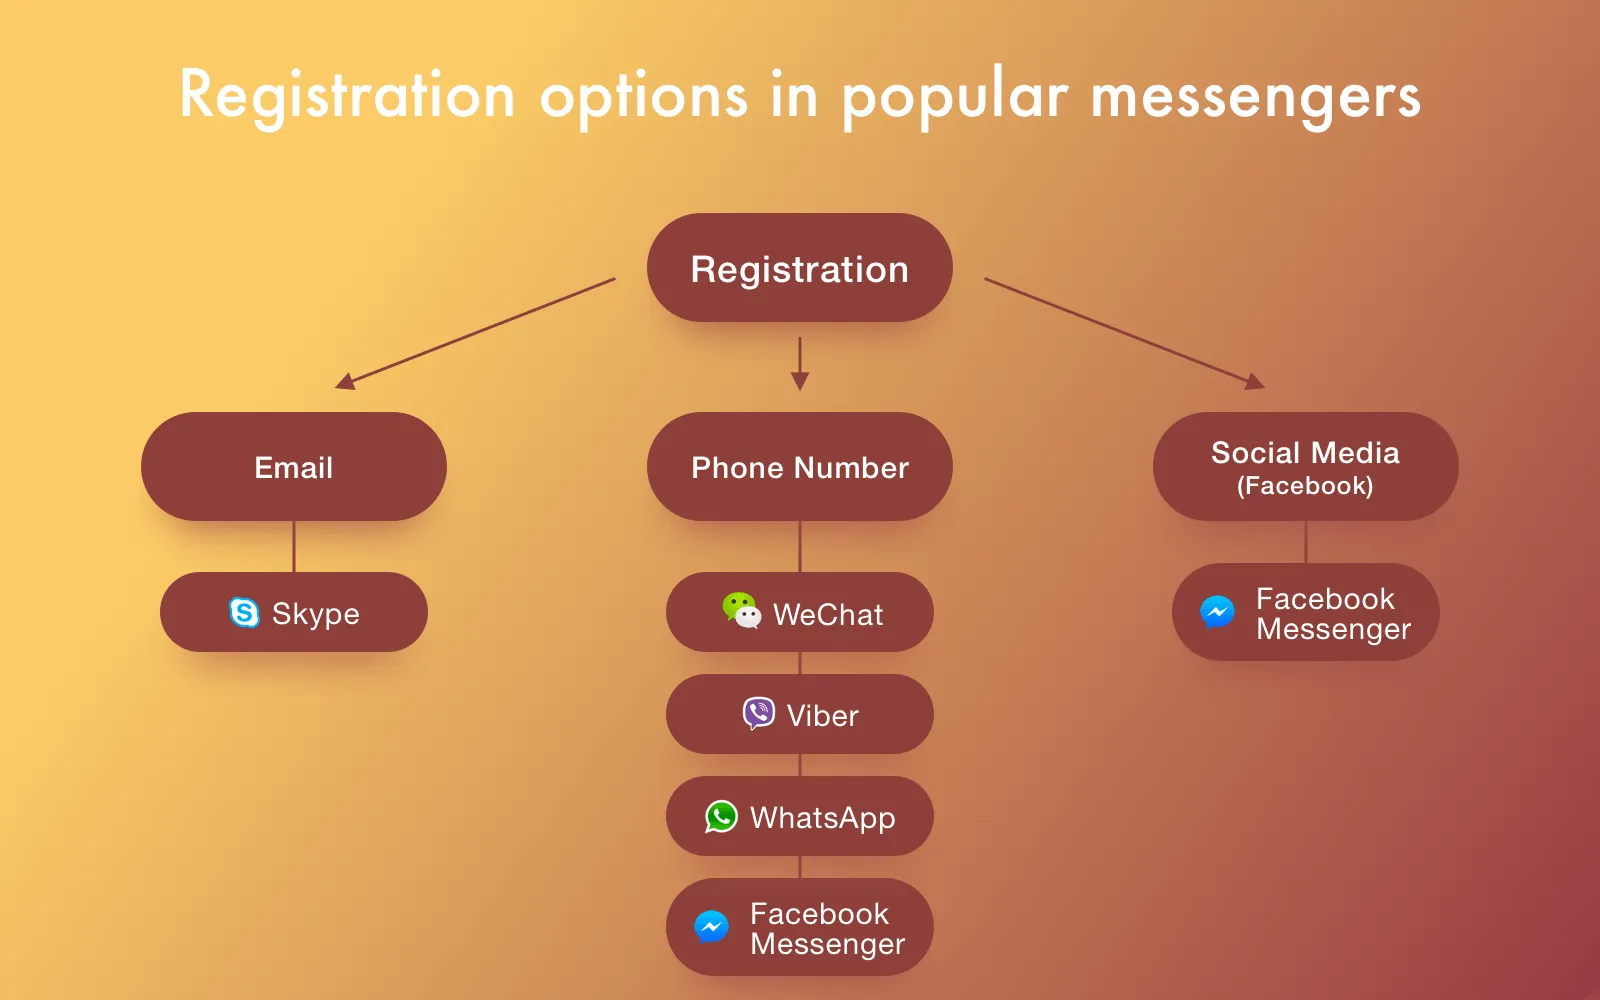 Example of registration options in different popular messengers